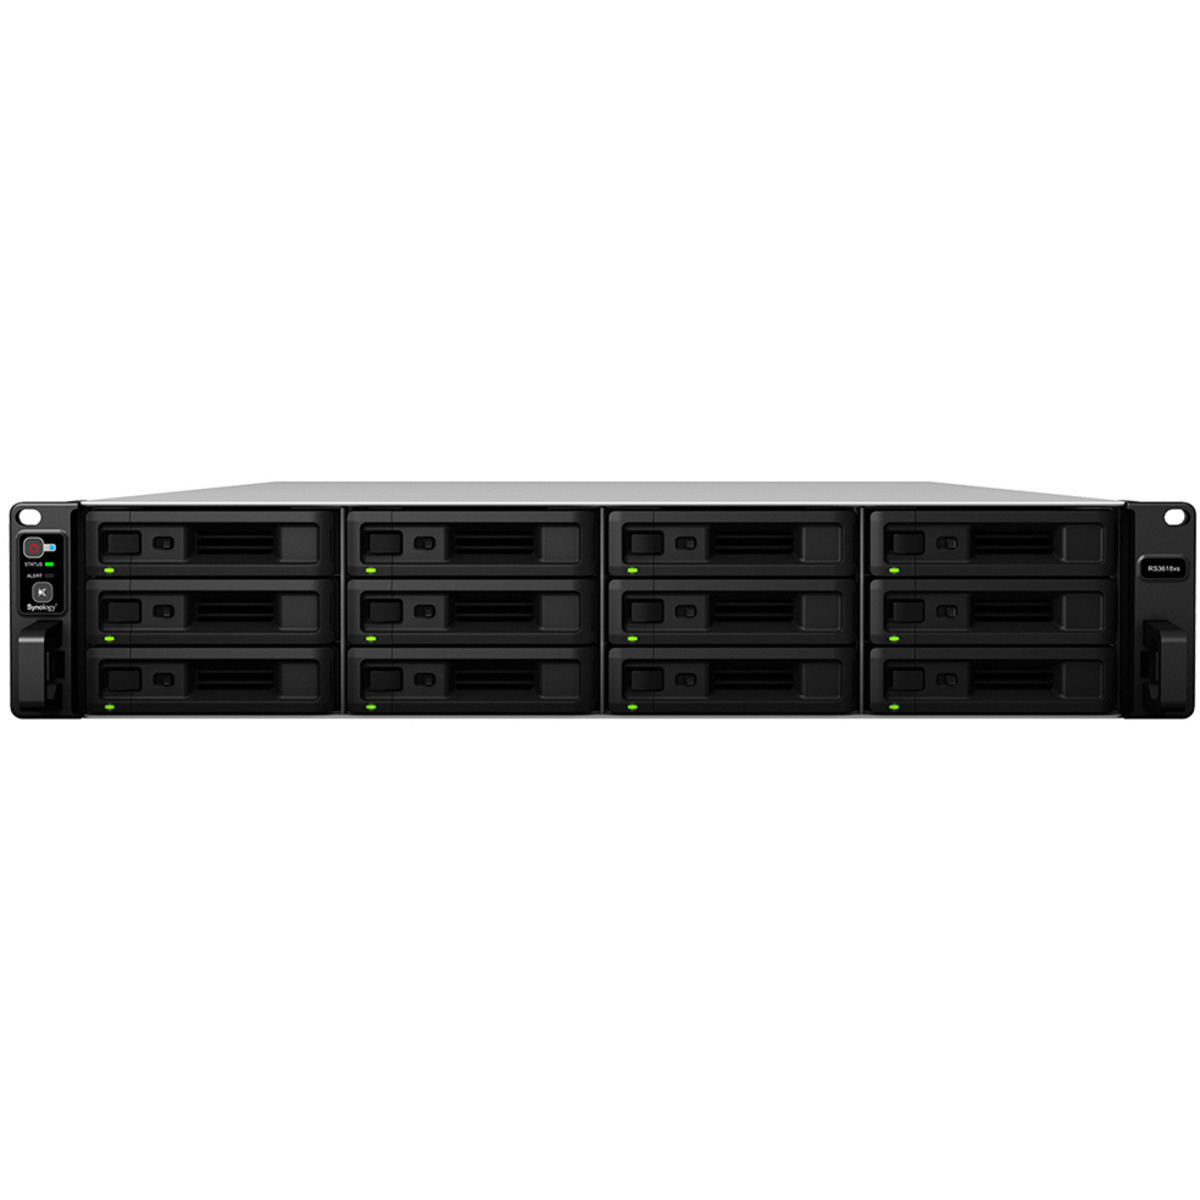 Synology RackStation RS3618xs 162tb 12-Bay RackMount Large Business / Enterprise NAS - Network Attached Storage Device 9x18tb Toshiba Enterprise Capacity MG09ACA18TE 3.5 7200rpm SATA 6Gb/s HDD ENTERPRISE Class Drives Installed - Burn-In Tested RackStation RS3618xs